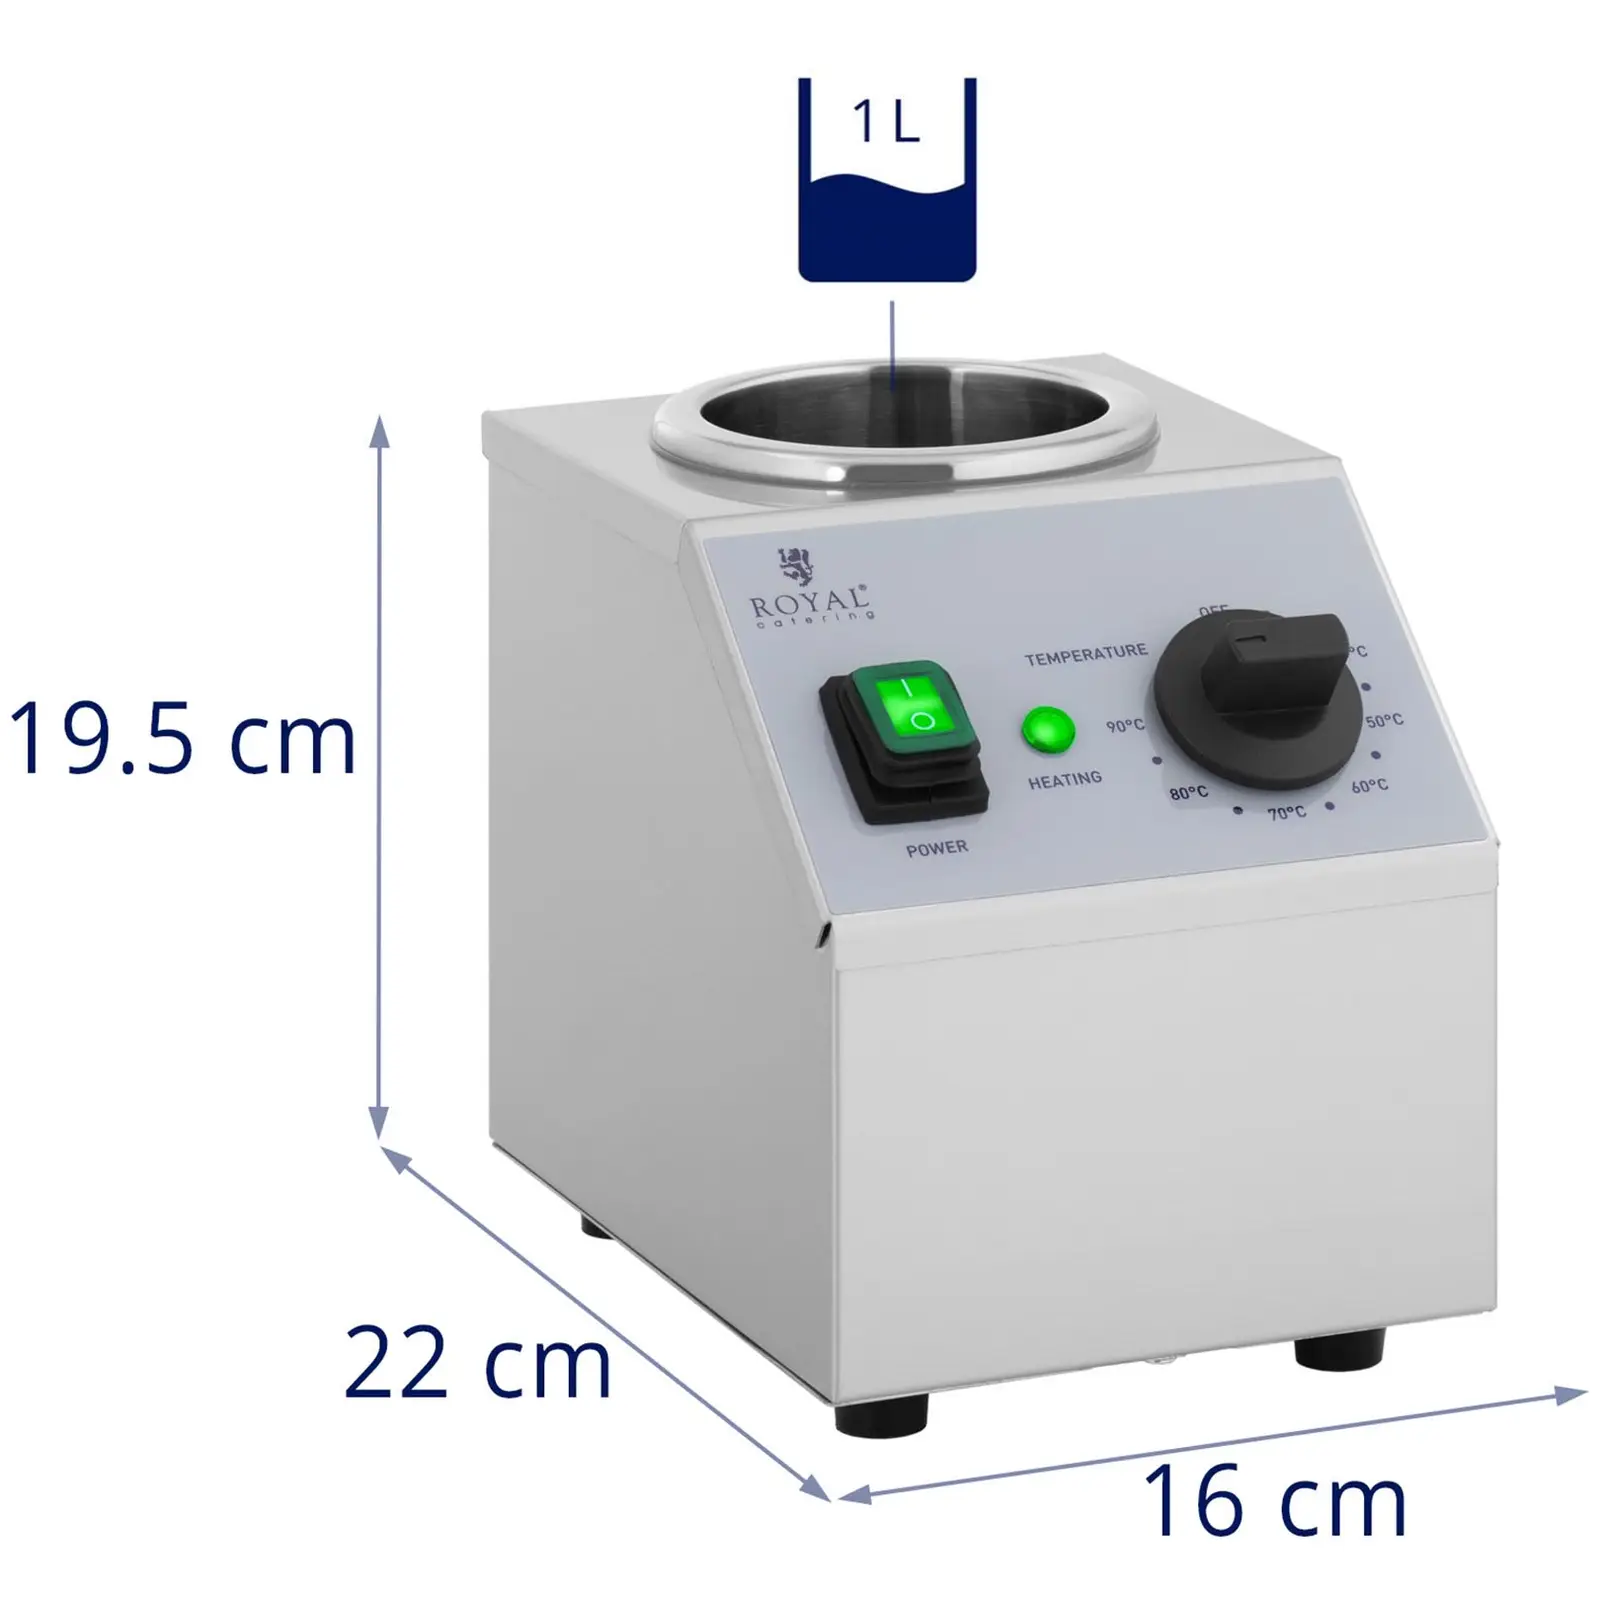 Sauce Warmer - 1 x 1 L - Top control panel - Royal Catering